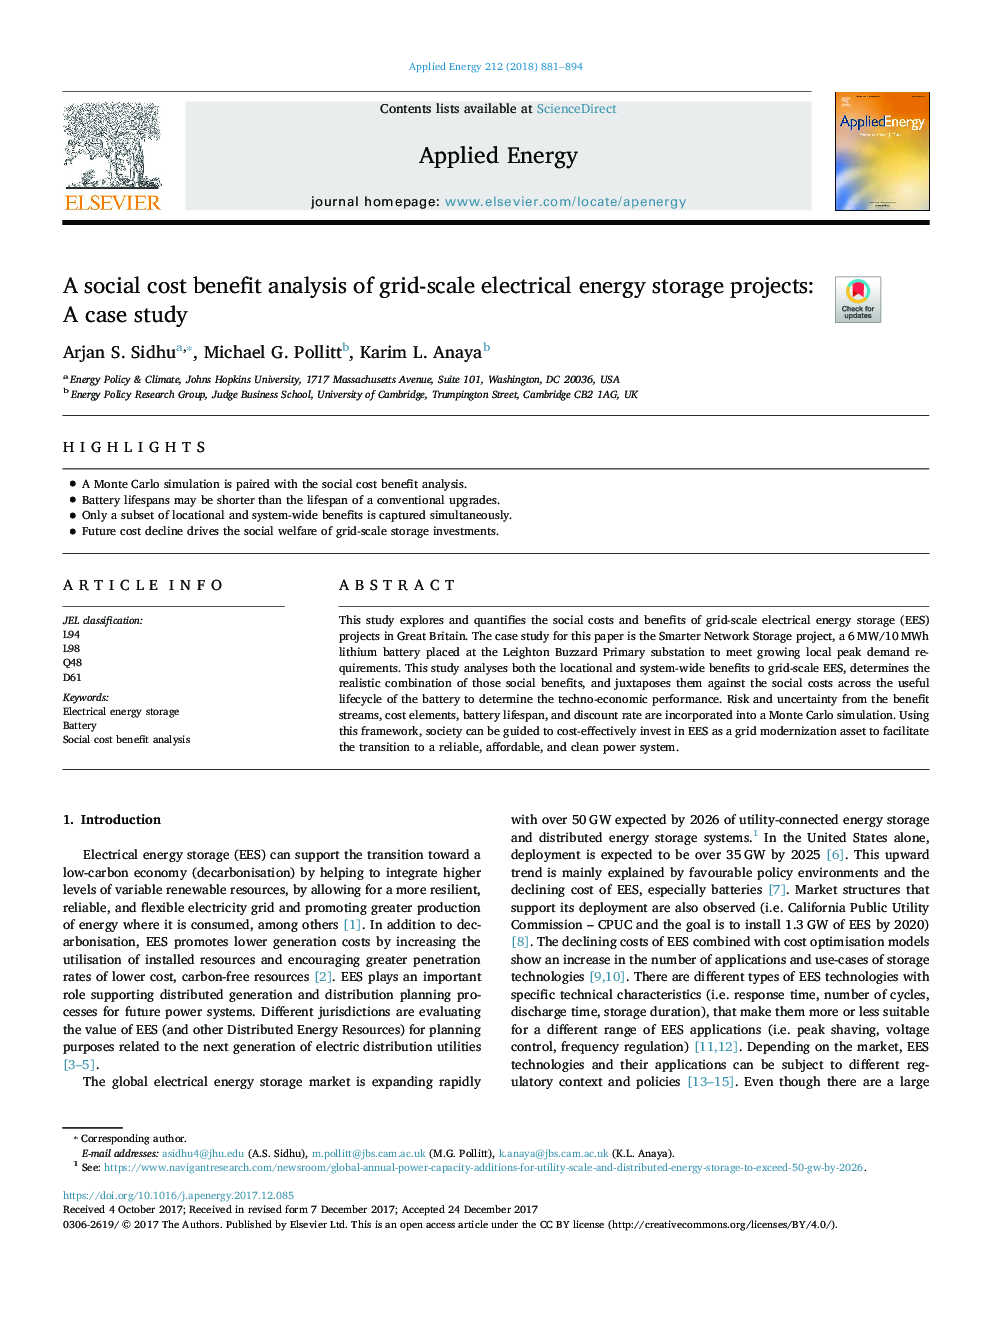 A social cost benefit analysis of grid-scale electrical energy storage projects: A case study